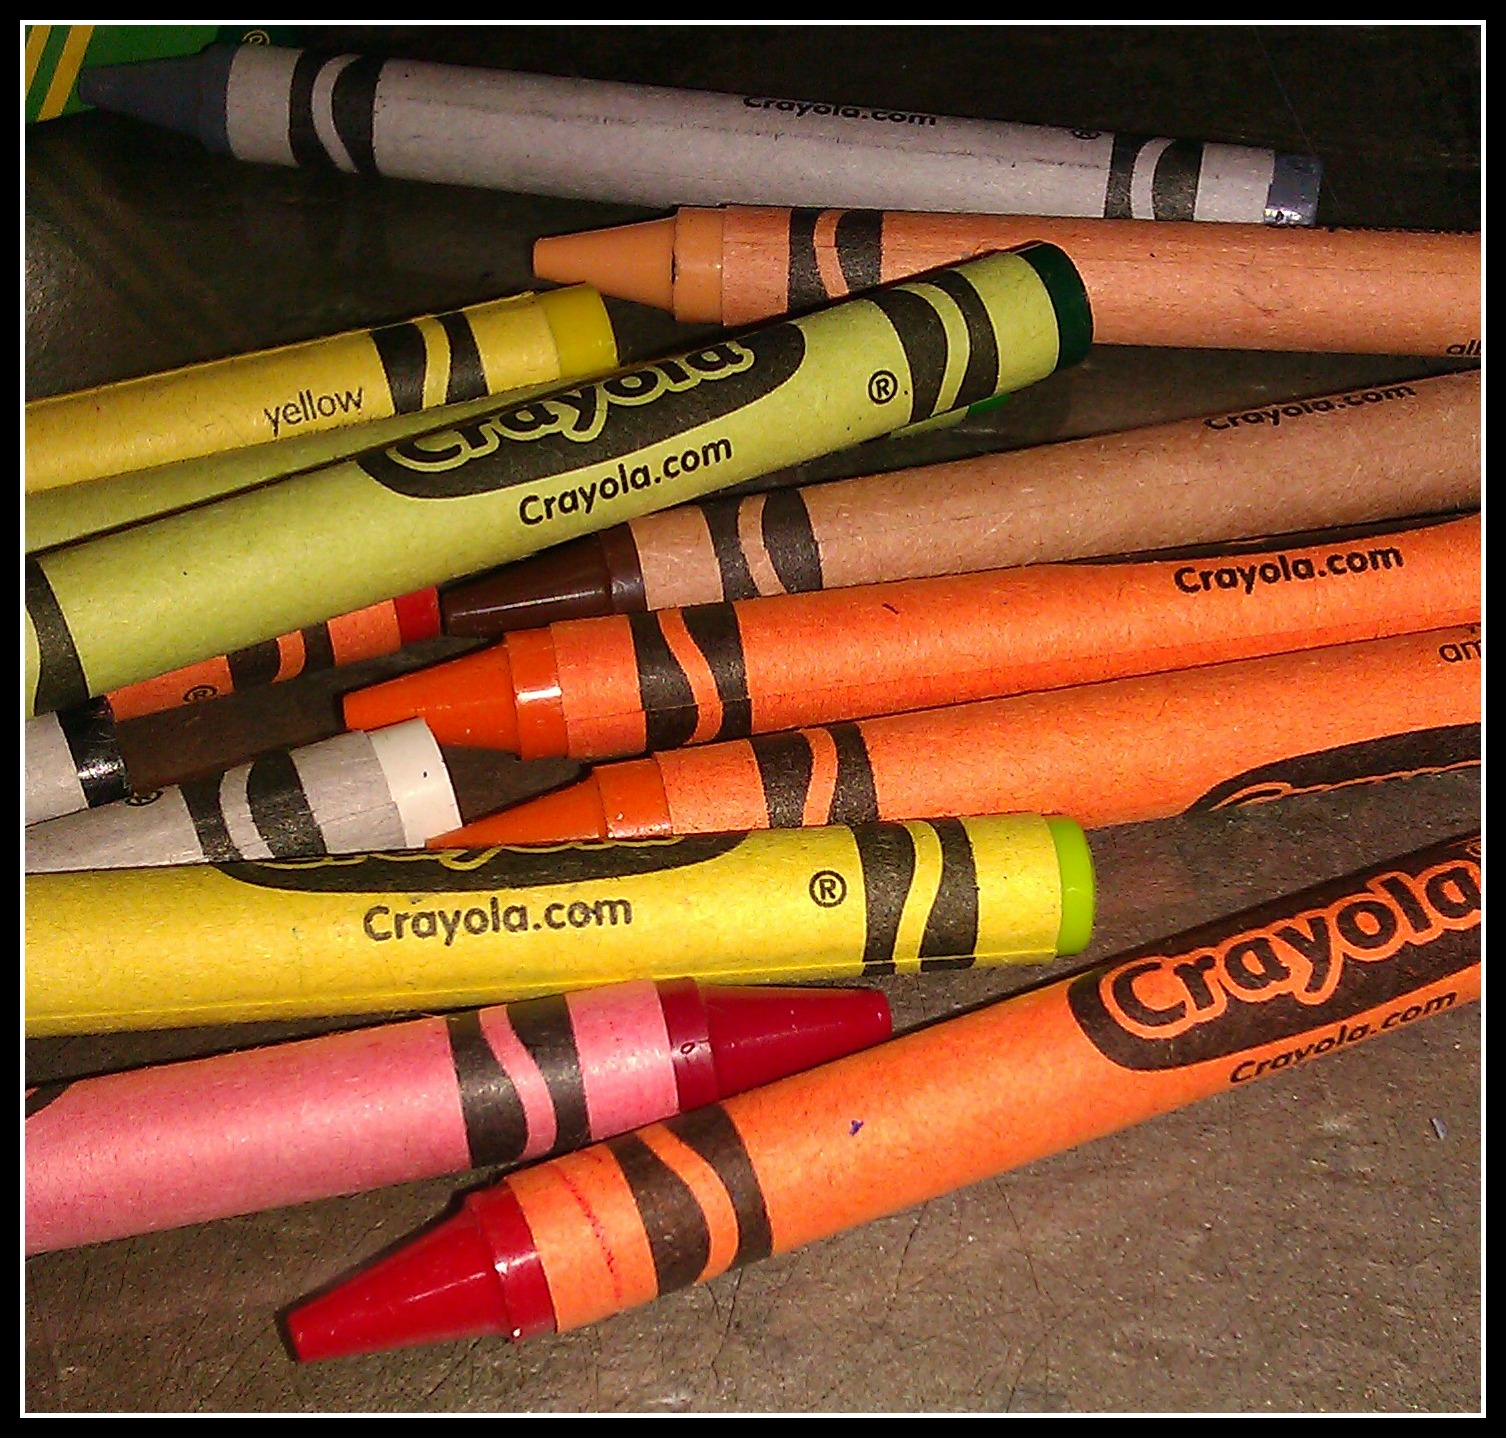 crayons being made